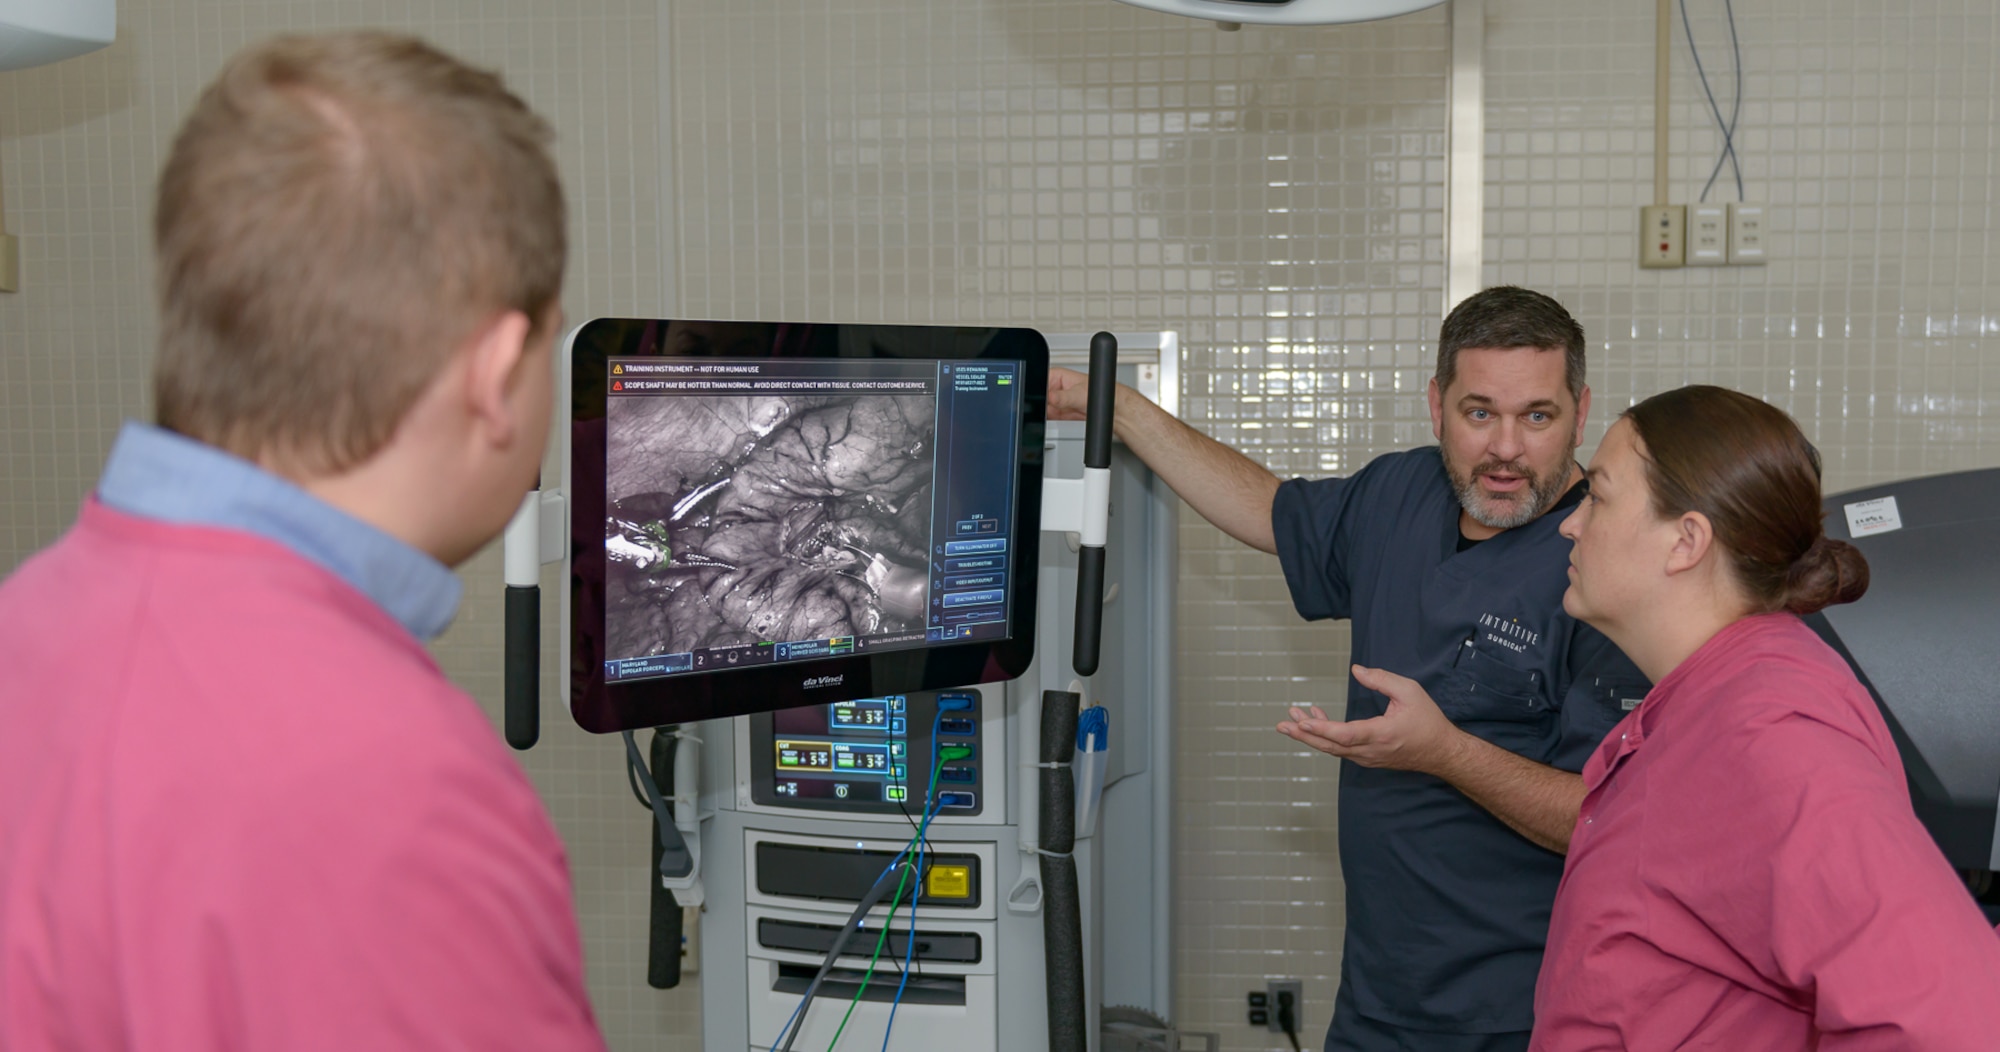 Jon Martin, Intuitive Surgical customer trainer, (center), discusses the DiVinci Xi surgical system at the Clinical Research Lab with Dr. Svyatoslav Guznor, 711th Human Performance Wing Airman systems directorate research psychologist, and Capt. Breanna Raney, 711th HPW Airman systems directorate program manager, Air Force Research Lab, Wright-Patterson Air Force Base, Ohio, Nov. 14, 2017, on Keesler Air Force Base, Mississippi. Guznor and Raney visited Keesler to get a better understanding of robotics surgery in the Air Force by touring the InDorse Lab and observing surgeons, nurses, and techs to get basic training on the Da Vinci machine. They also interviewed surgical staff and system trainers on their interactions with the robot and the team dynamics, and collaborated with the lead robotic surgeon about future joint ventures and research collaborations. (U.S. Air Force photo by Andre’ Askew)